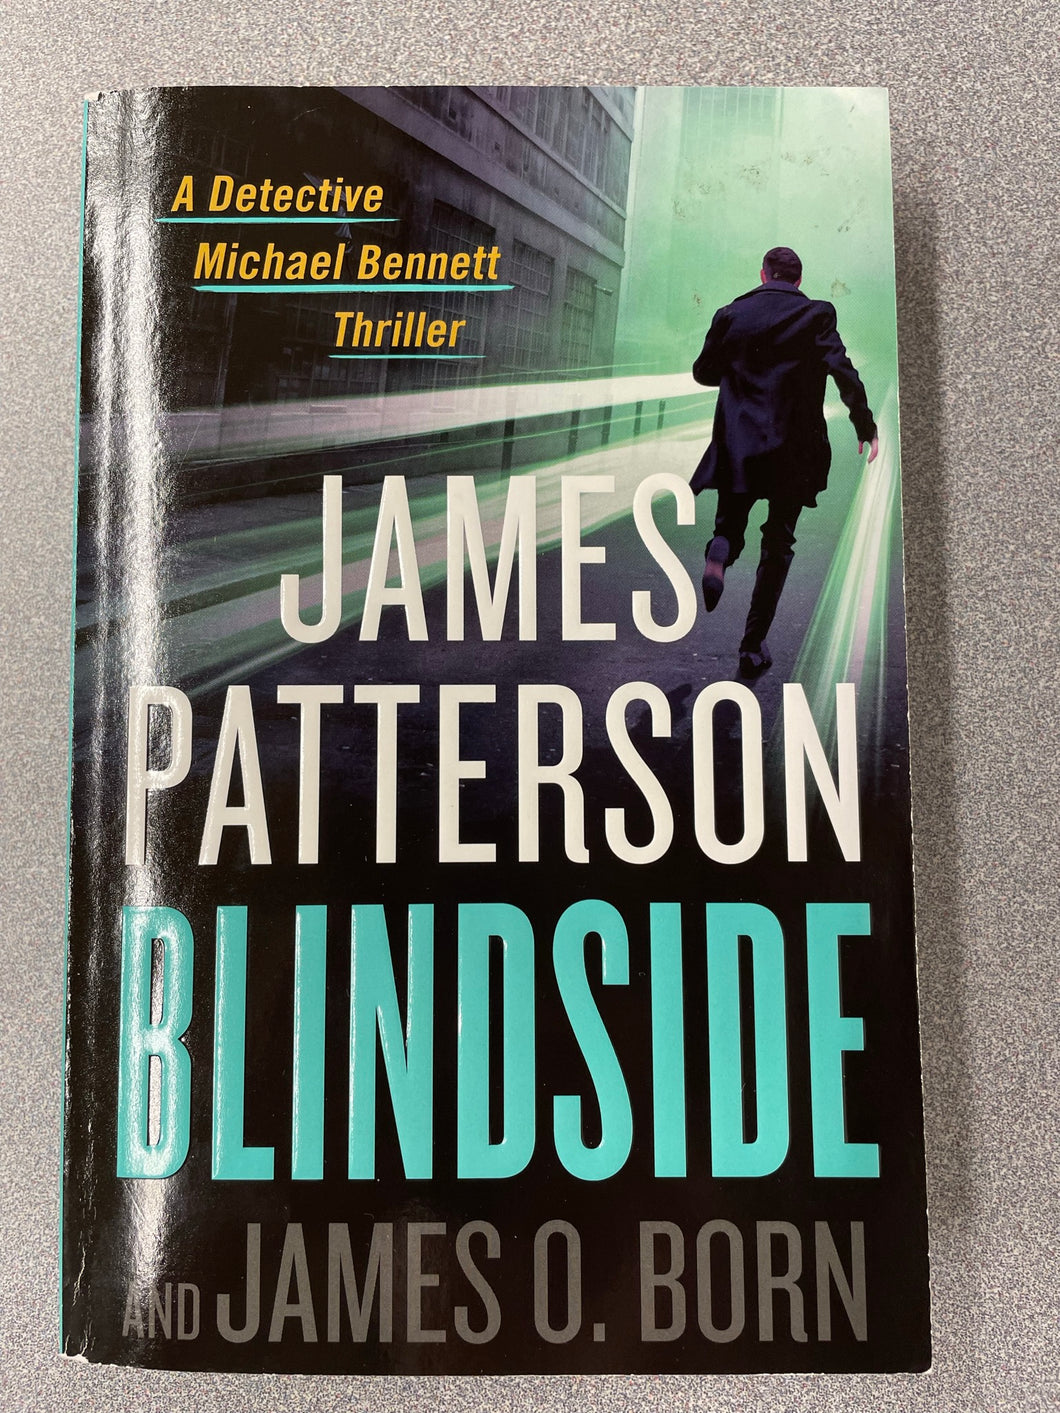 Patterson, James and James O. Born, Blindside [2020] MY 7/23